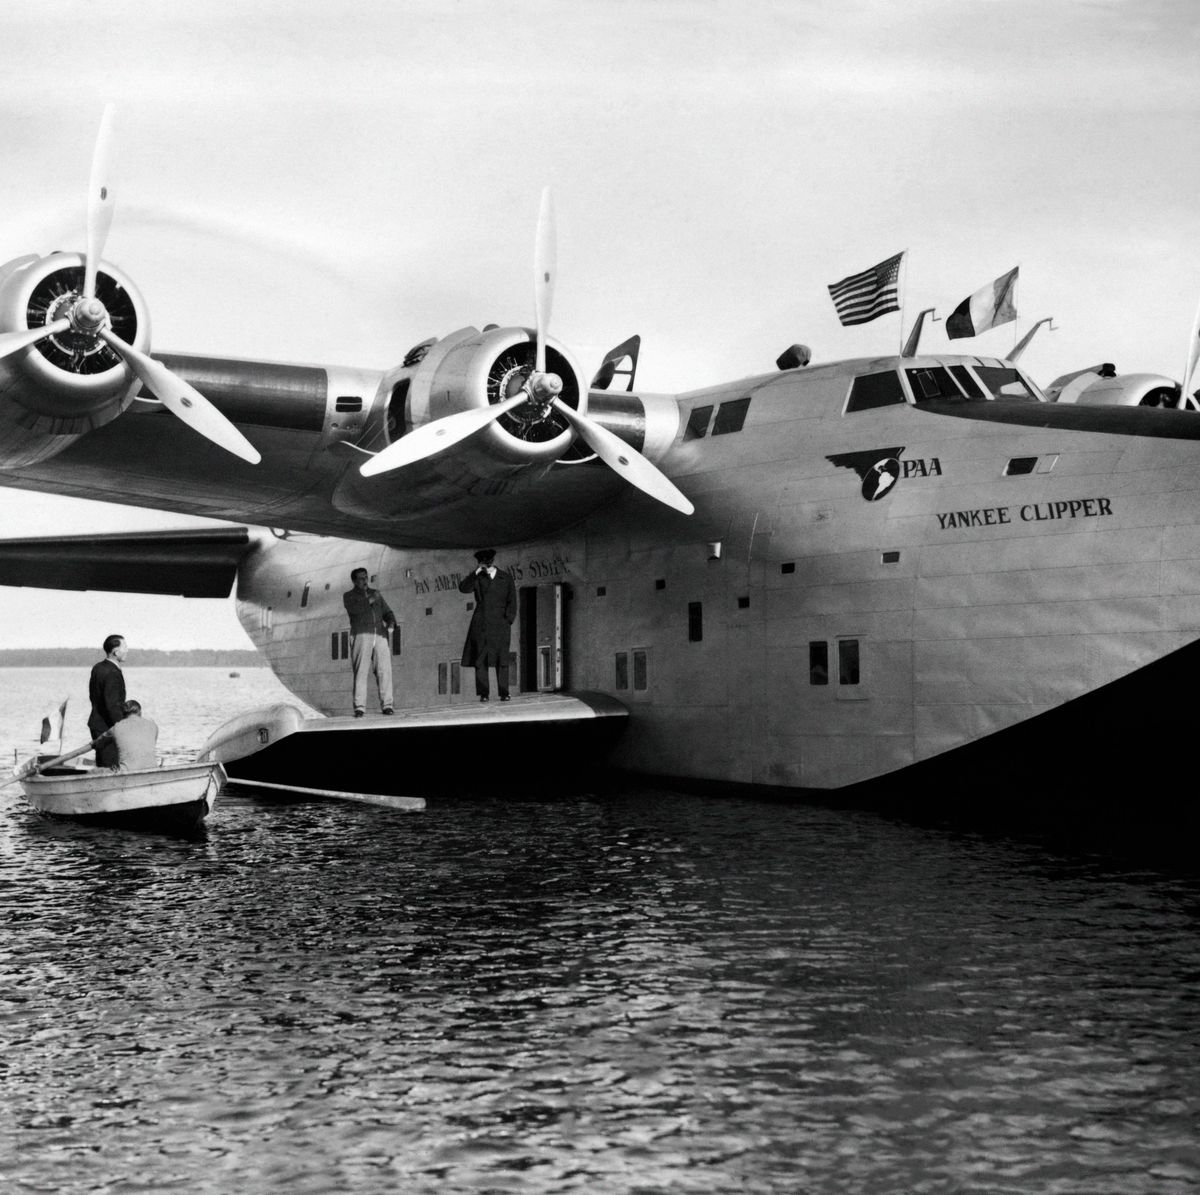 https://hips.hearstapps.com/hmg-prod/images/pan-americain-airways-yankee-clipper-is-seen-after-landing-news-photo-1604016066.?crop=0.705xw:1.00xh;0.293xw,0&resize=1200:*